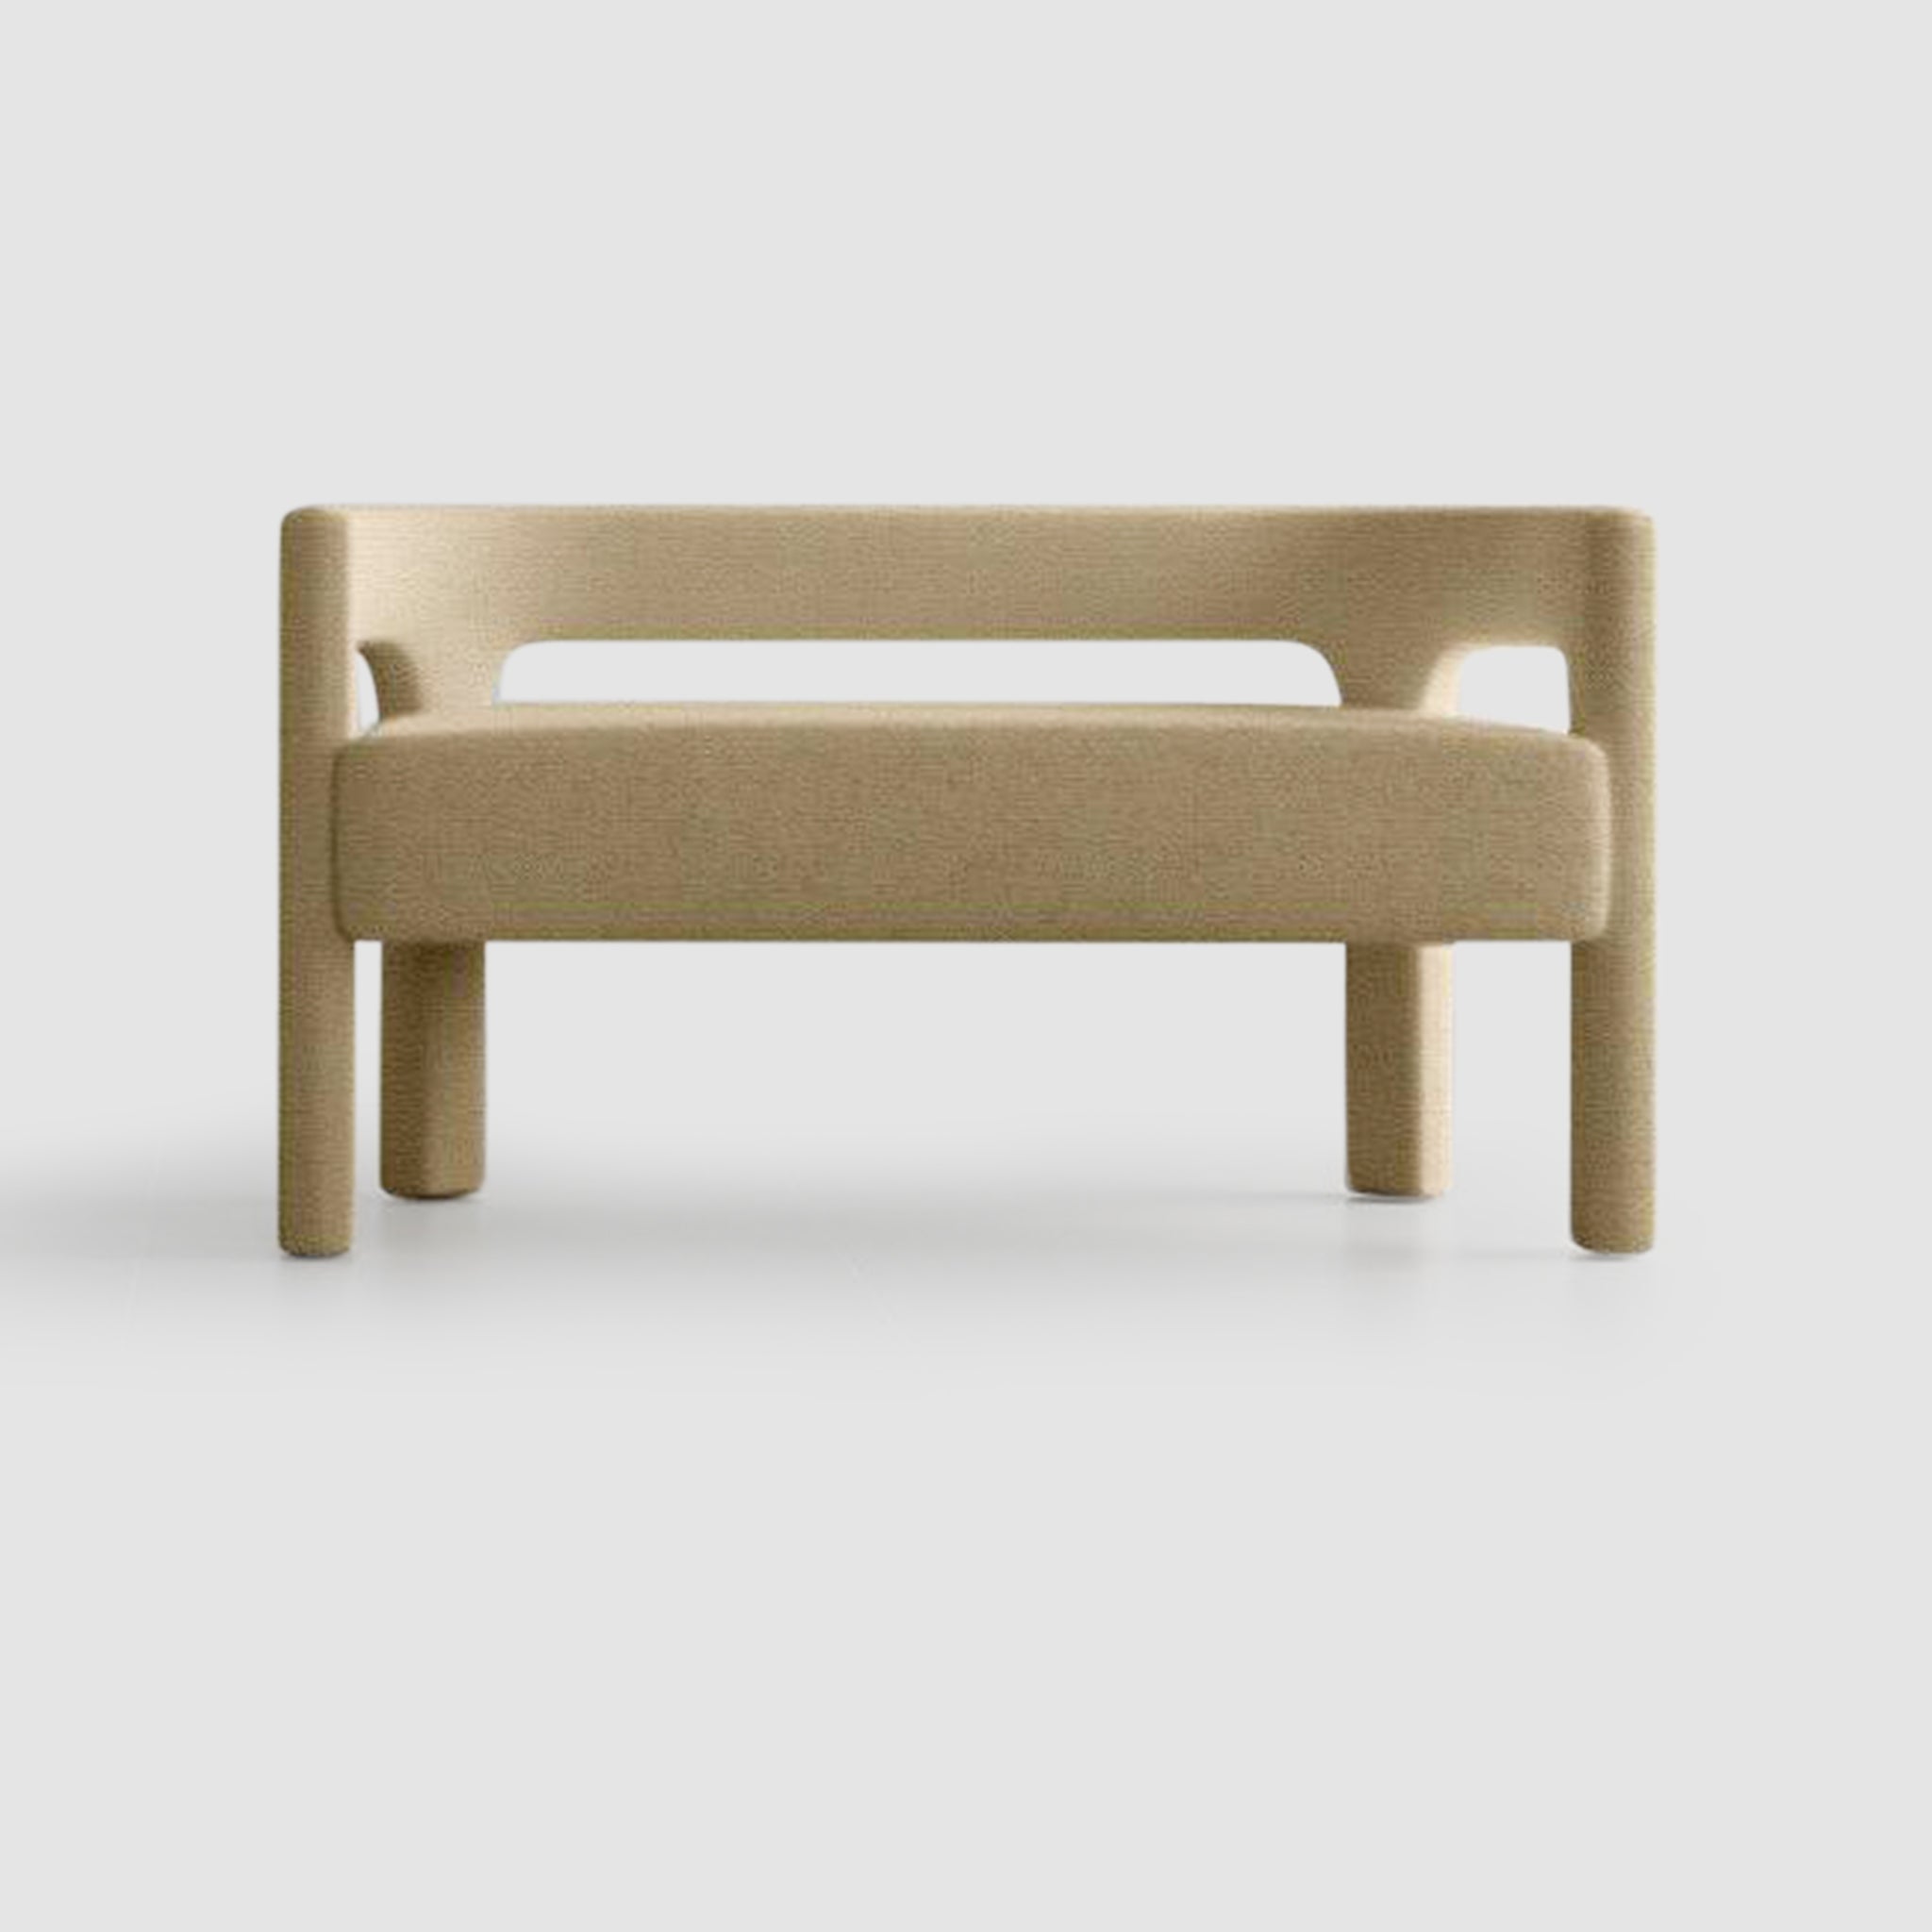 A modern two-seater sofa with a minimalist design in beige upholstery, featuring smooth, rounded edges and a solid structure, viewed from the front against a plain gray background.